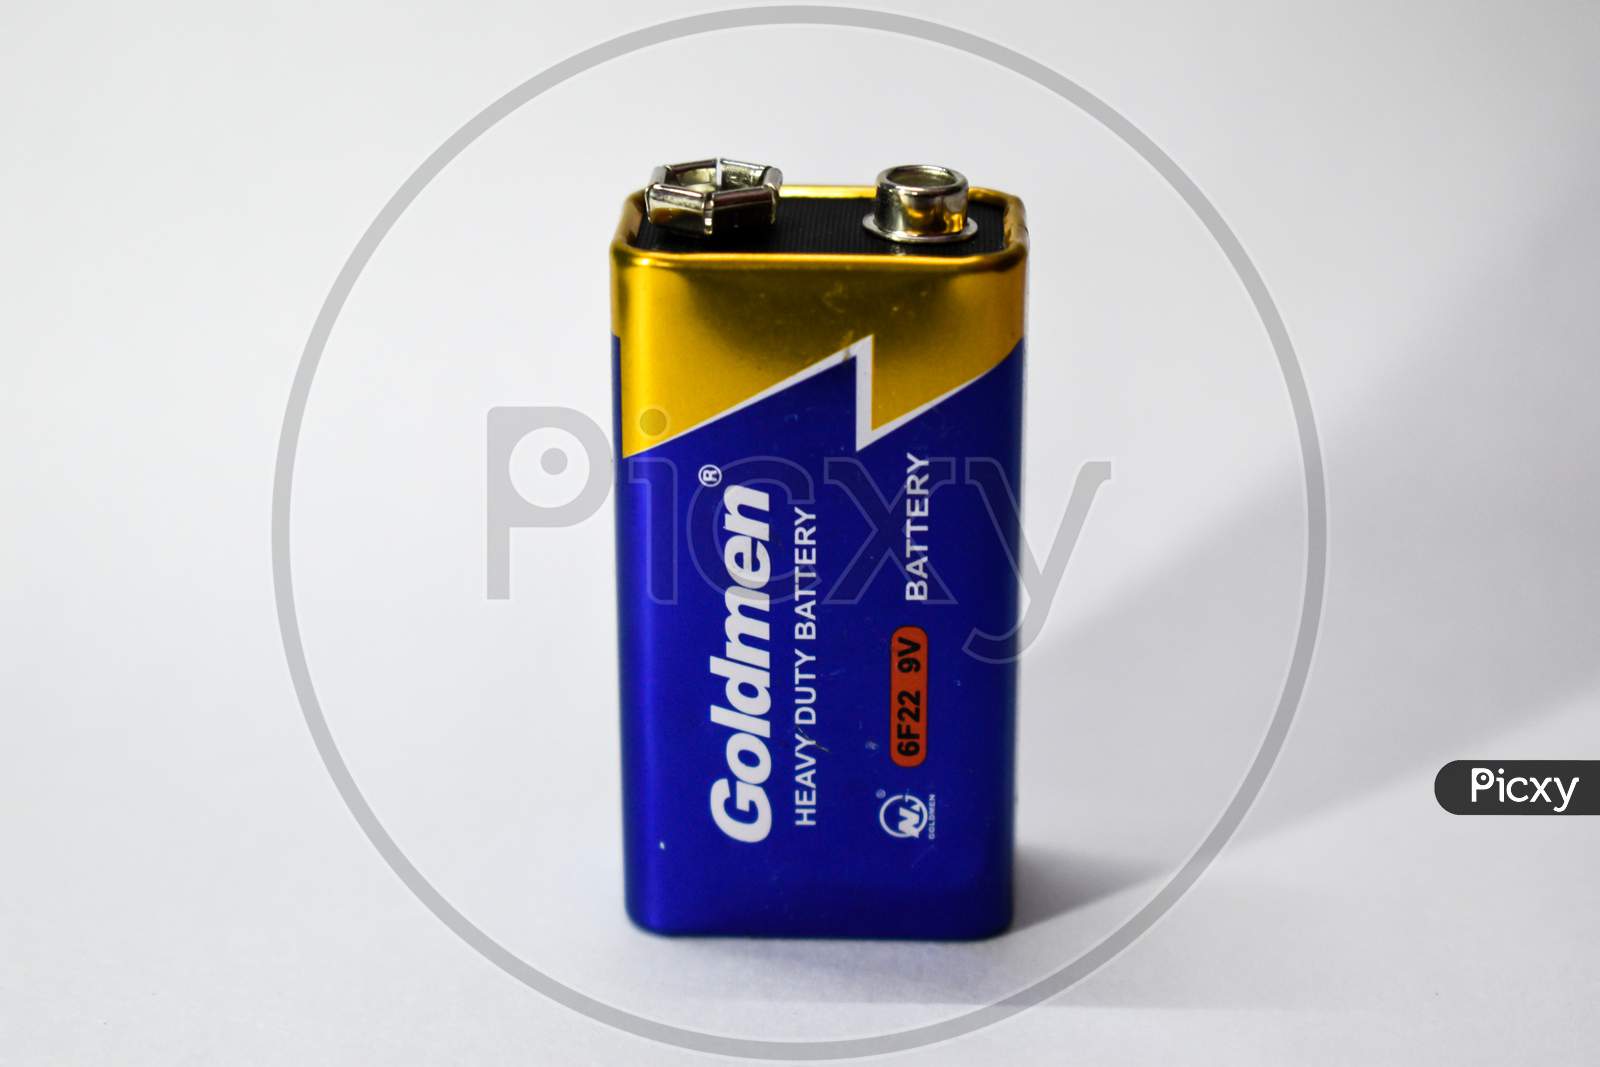 07/06/2020- Kerala,India: Close-Up Of A 9V Dry Cell Battery Of Goldmen Brand On White Background. Selective Focus Applied.